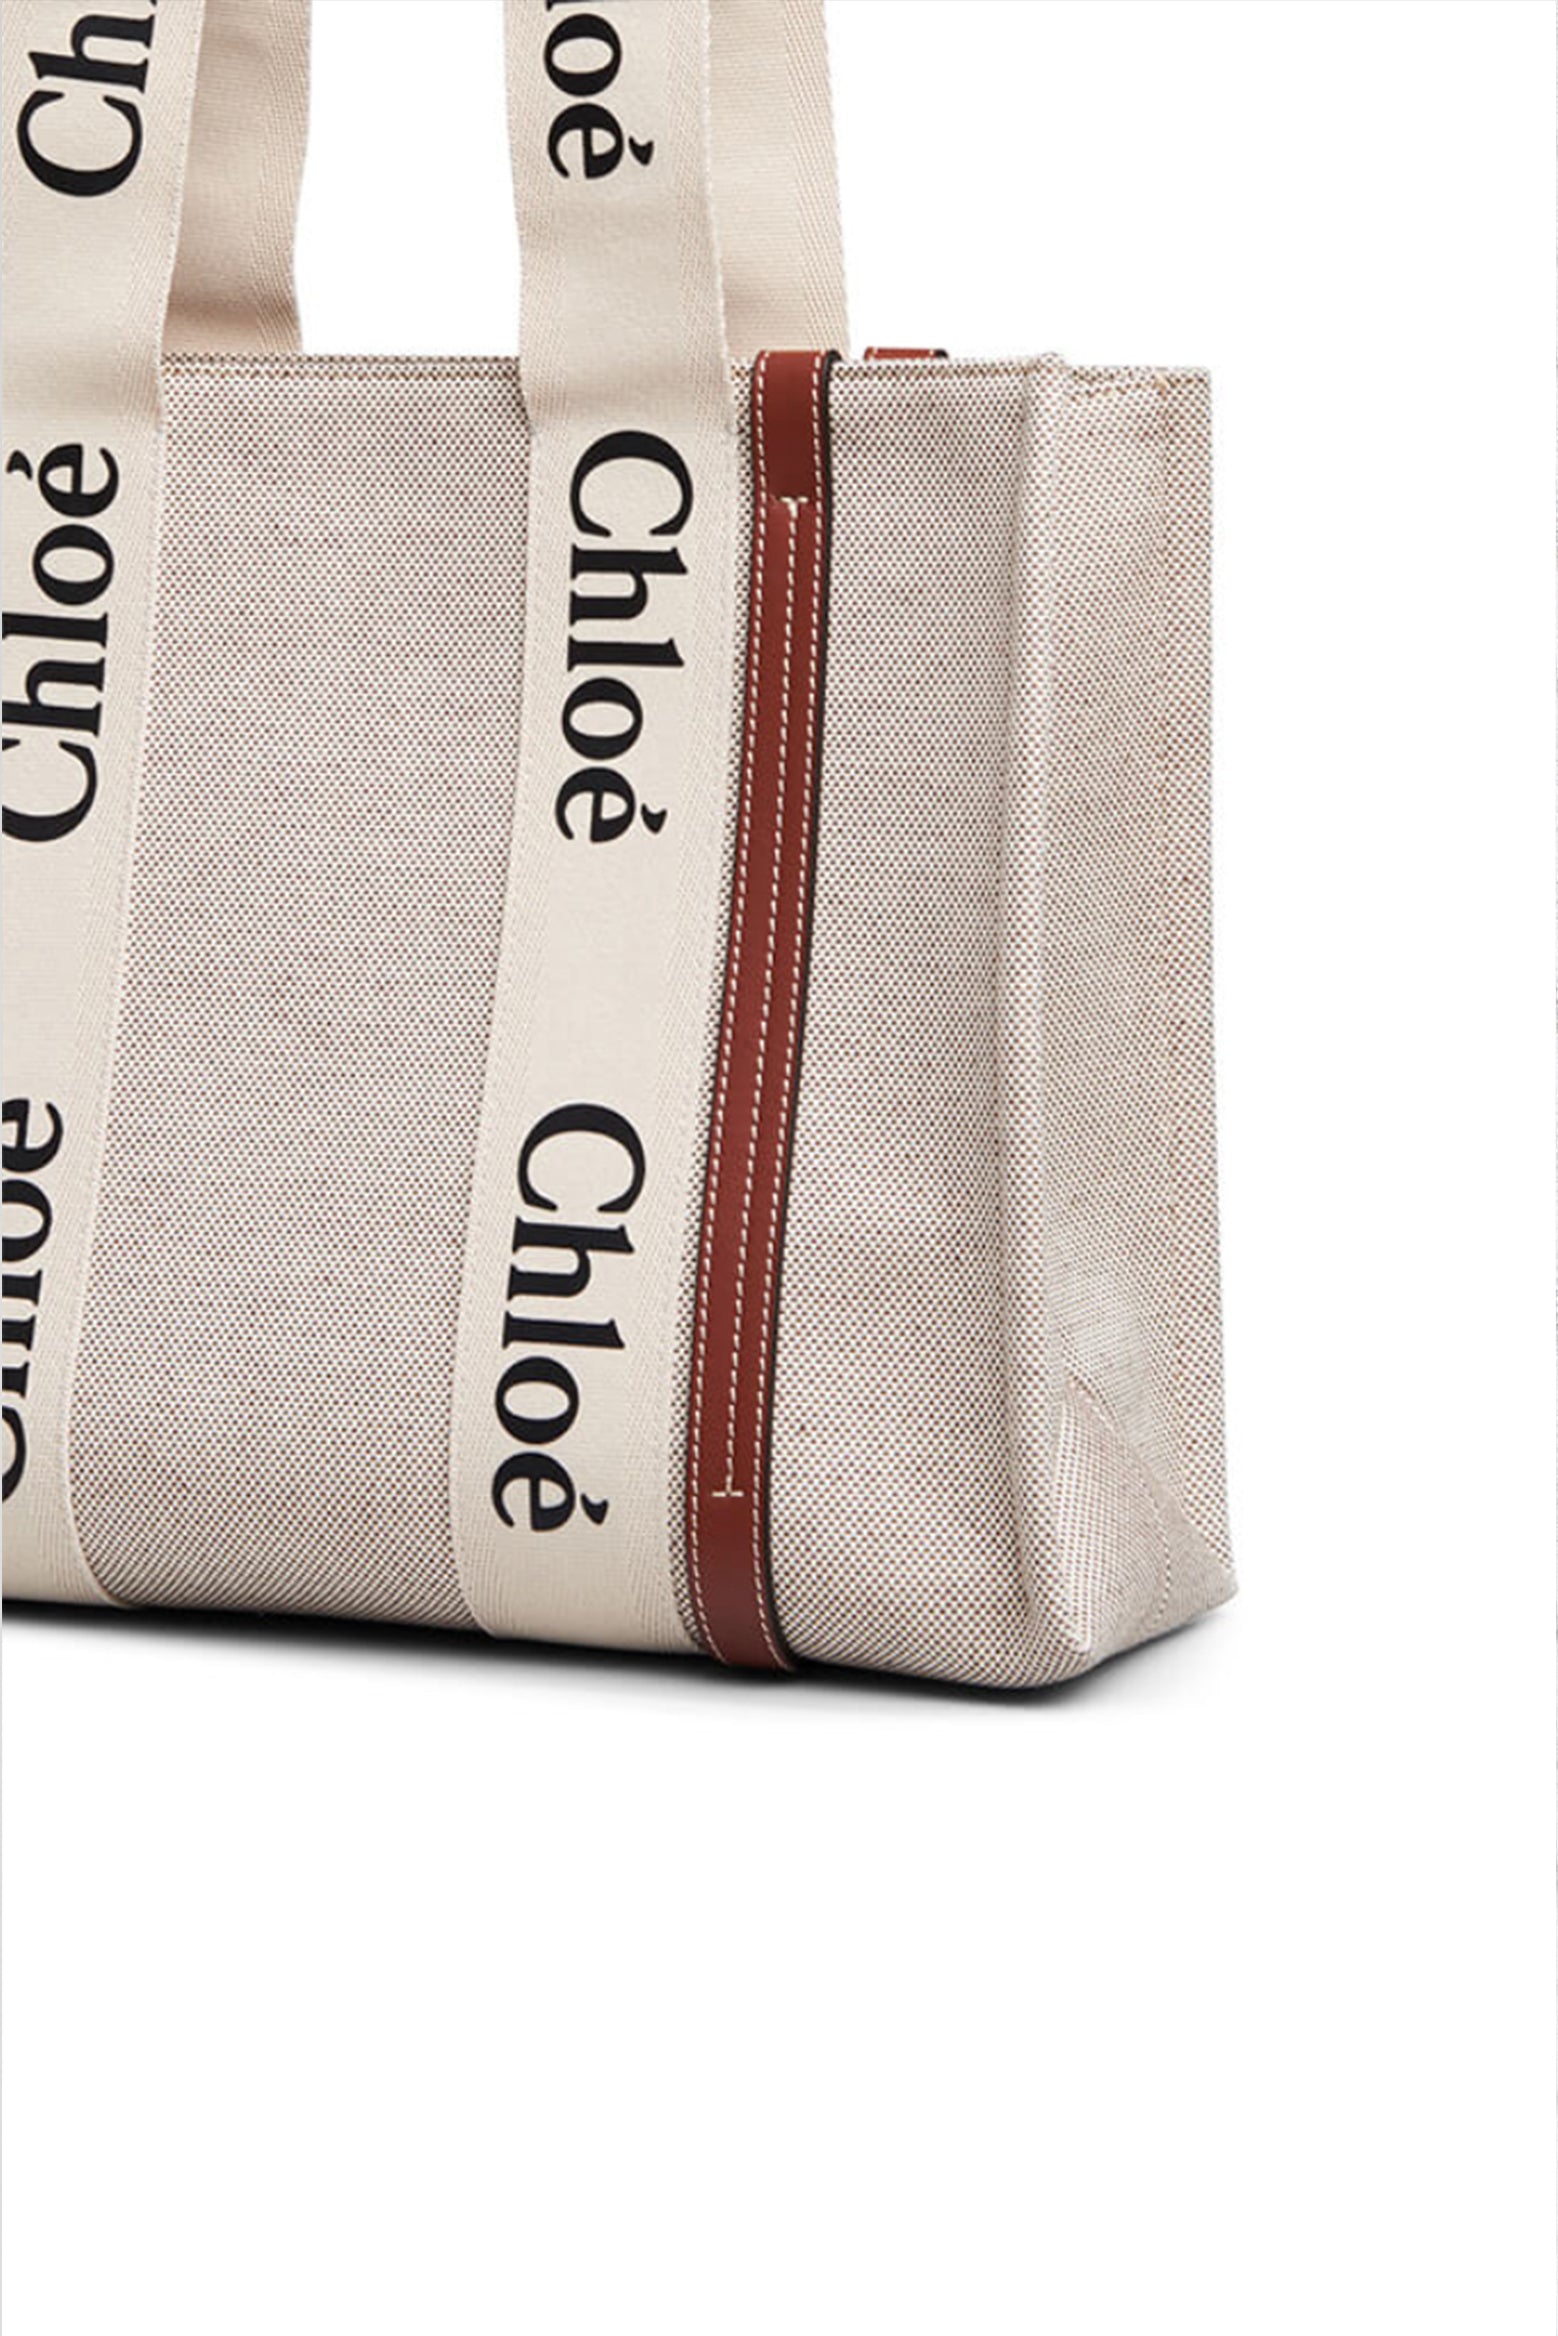 Chloé Woody Medium Tote in White and Brown available at The New Trend Australia.